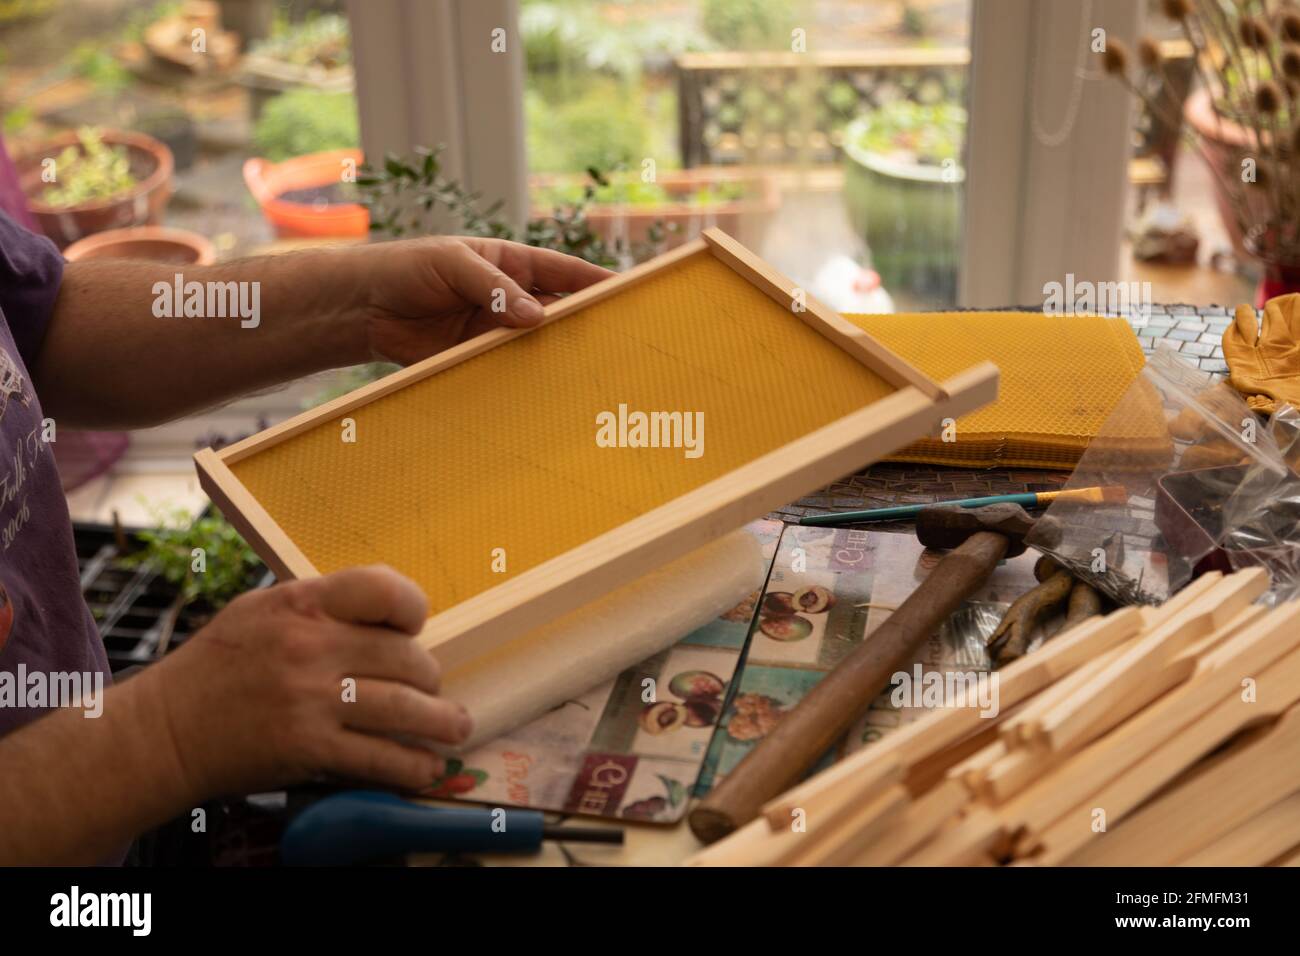 A beekeeper assembling DN4 brood frames for a beehive Stock Photo